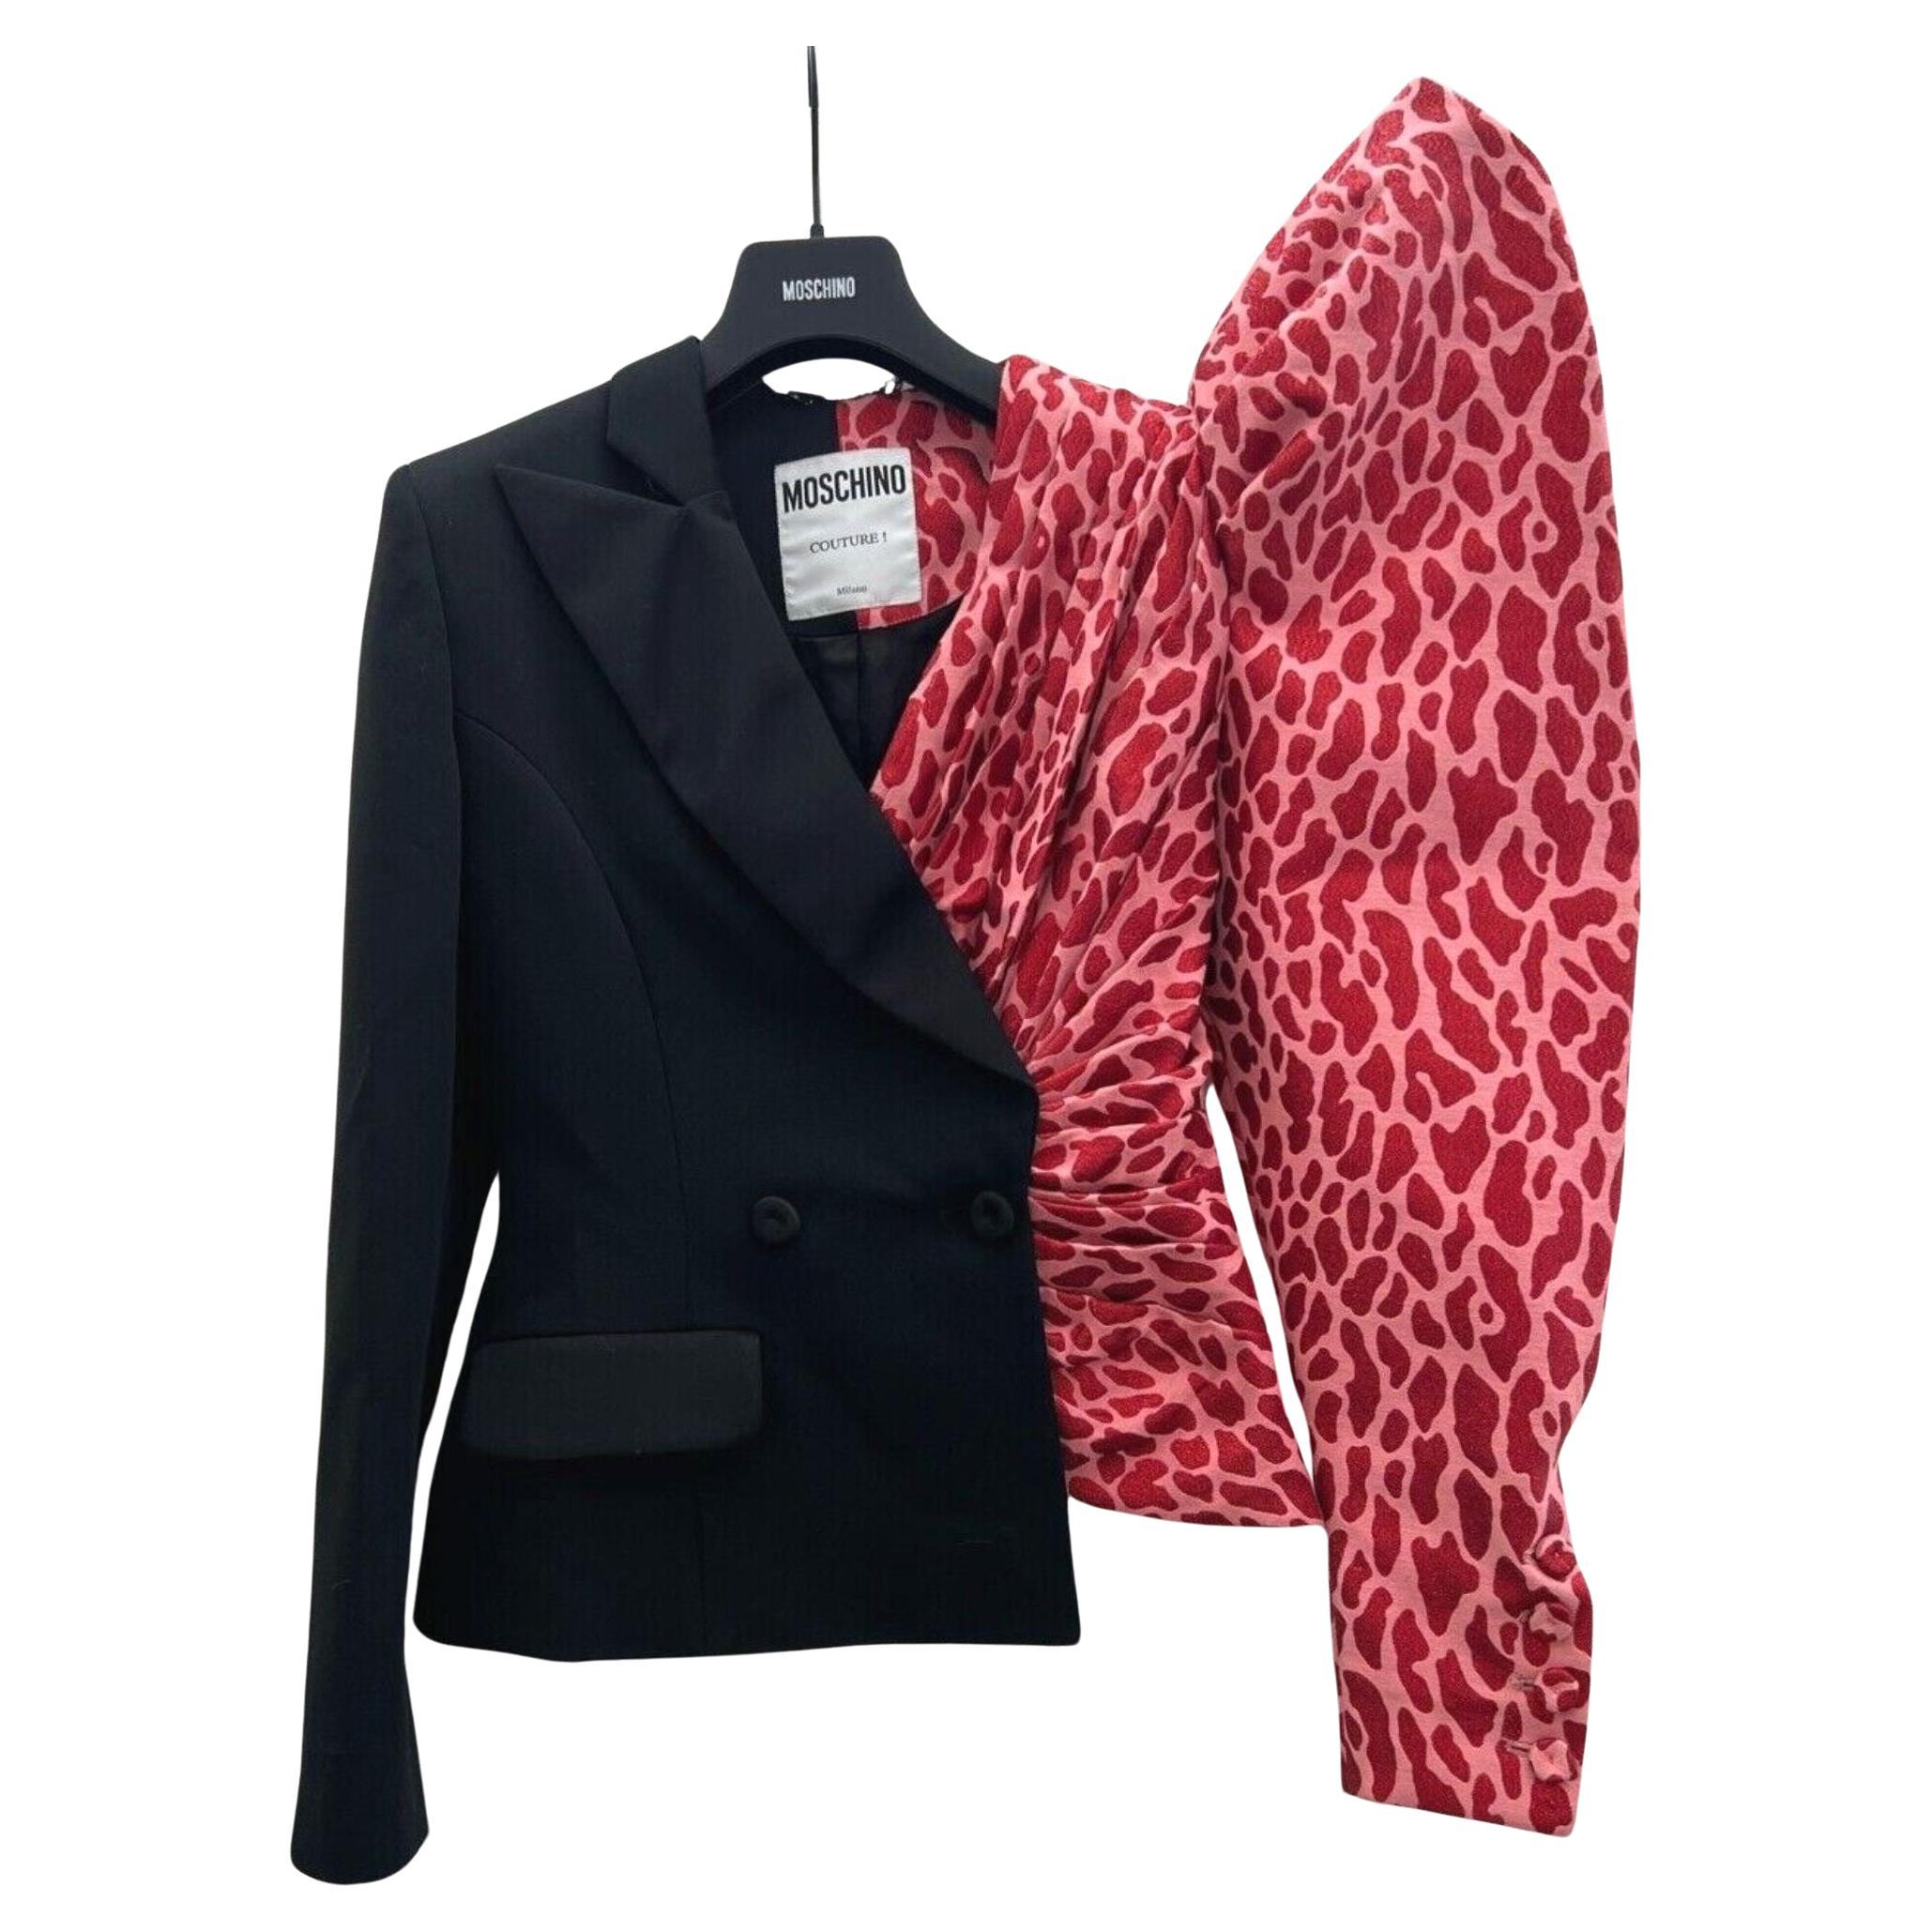 AW21 Moschino Couture Jacket Half Black Half Pink Leopard Spots by Jeremy Scott For Sale